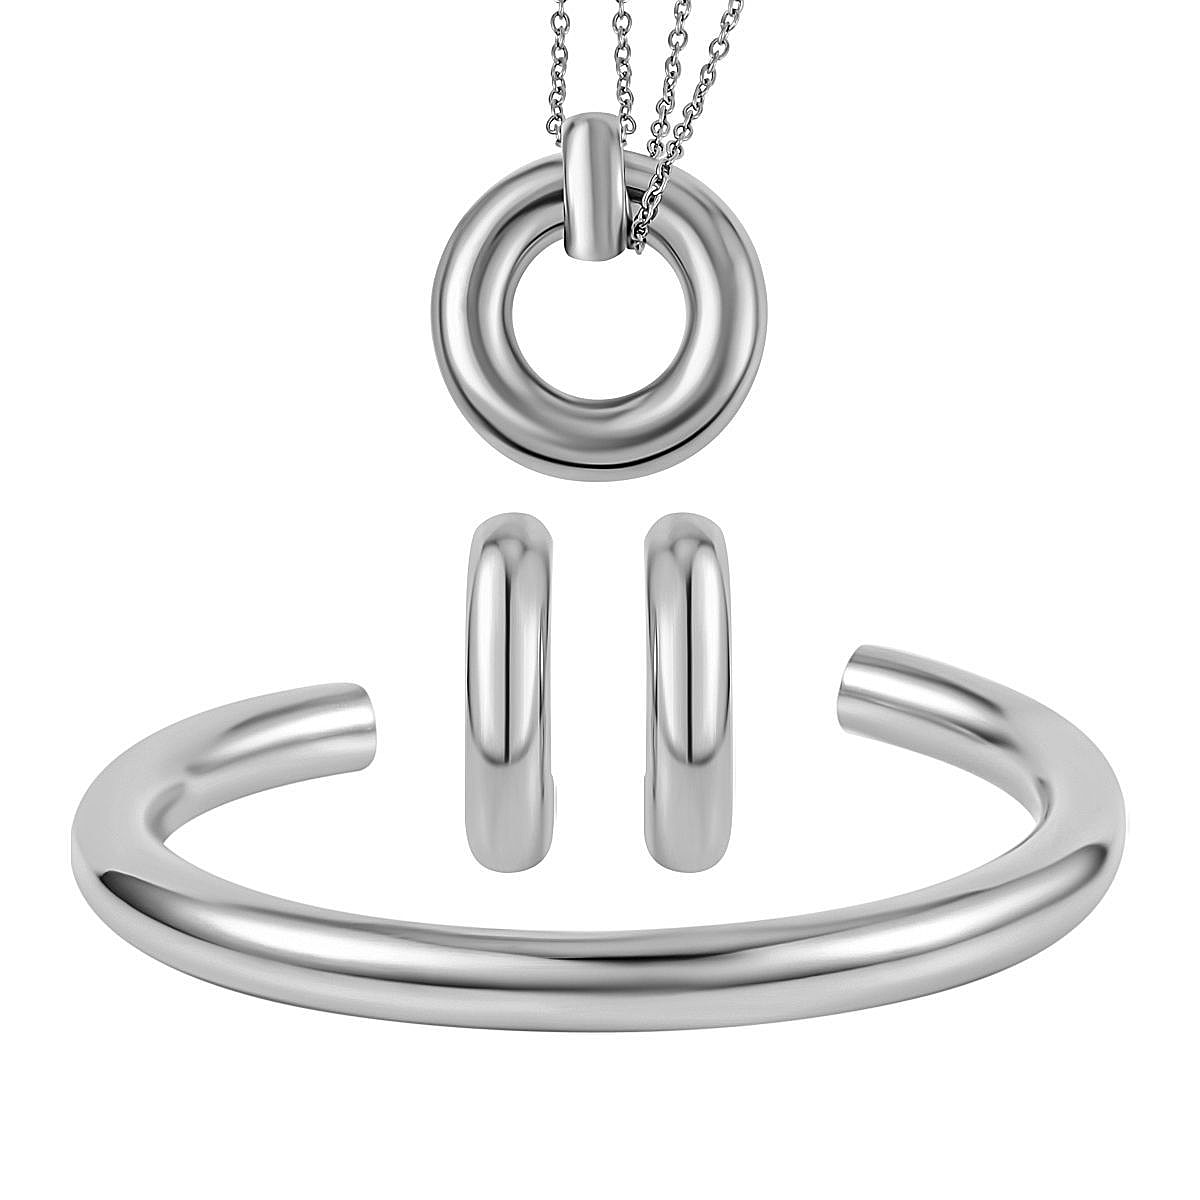 3 Piece Set - Circle Necklace (Size 20) and Openable Bangle (Size 7.5) and Hoop Earrings in Silver Tone